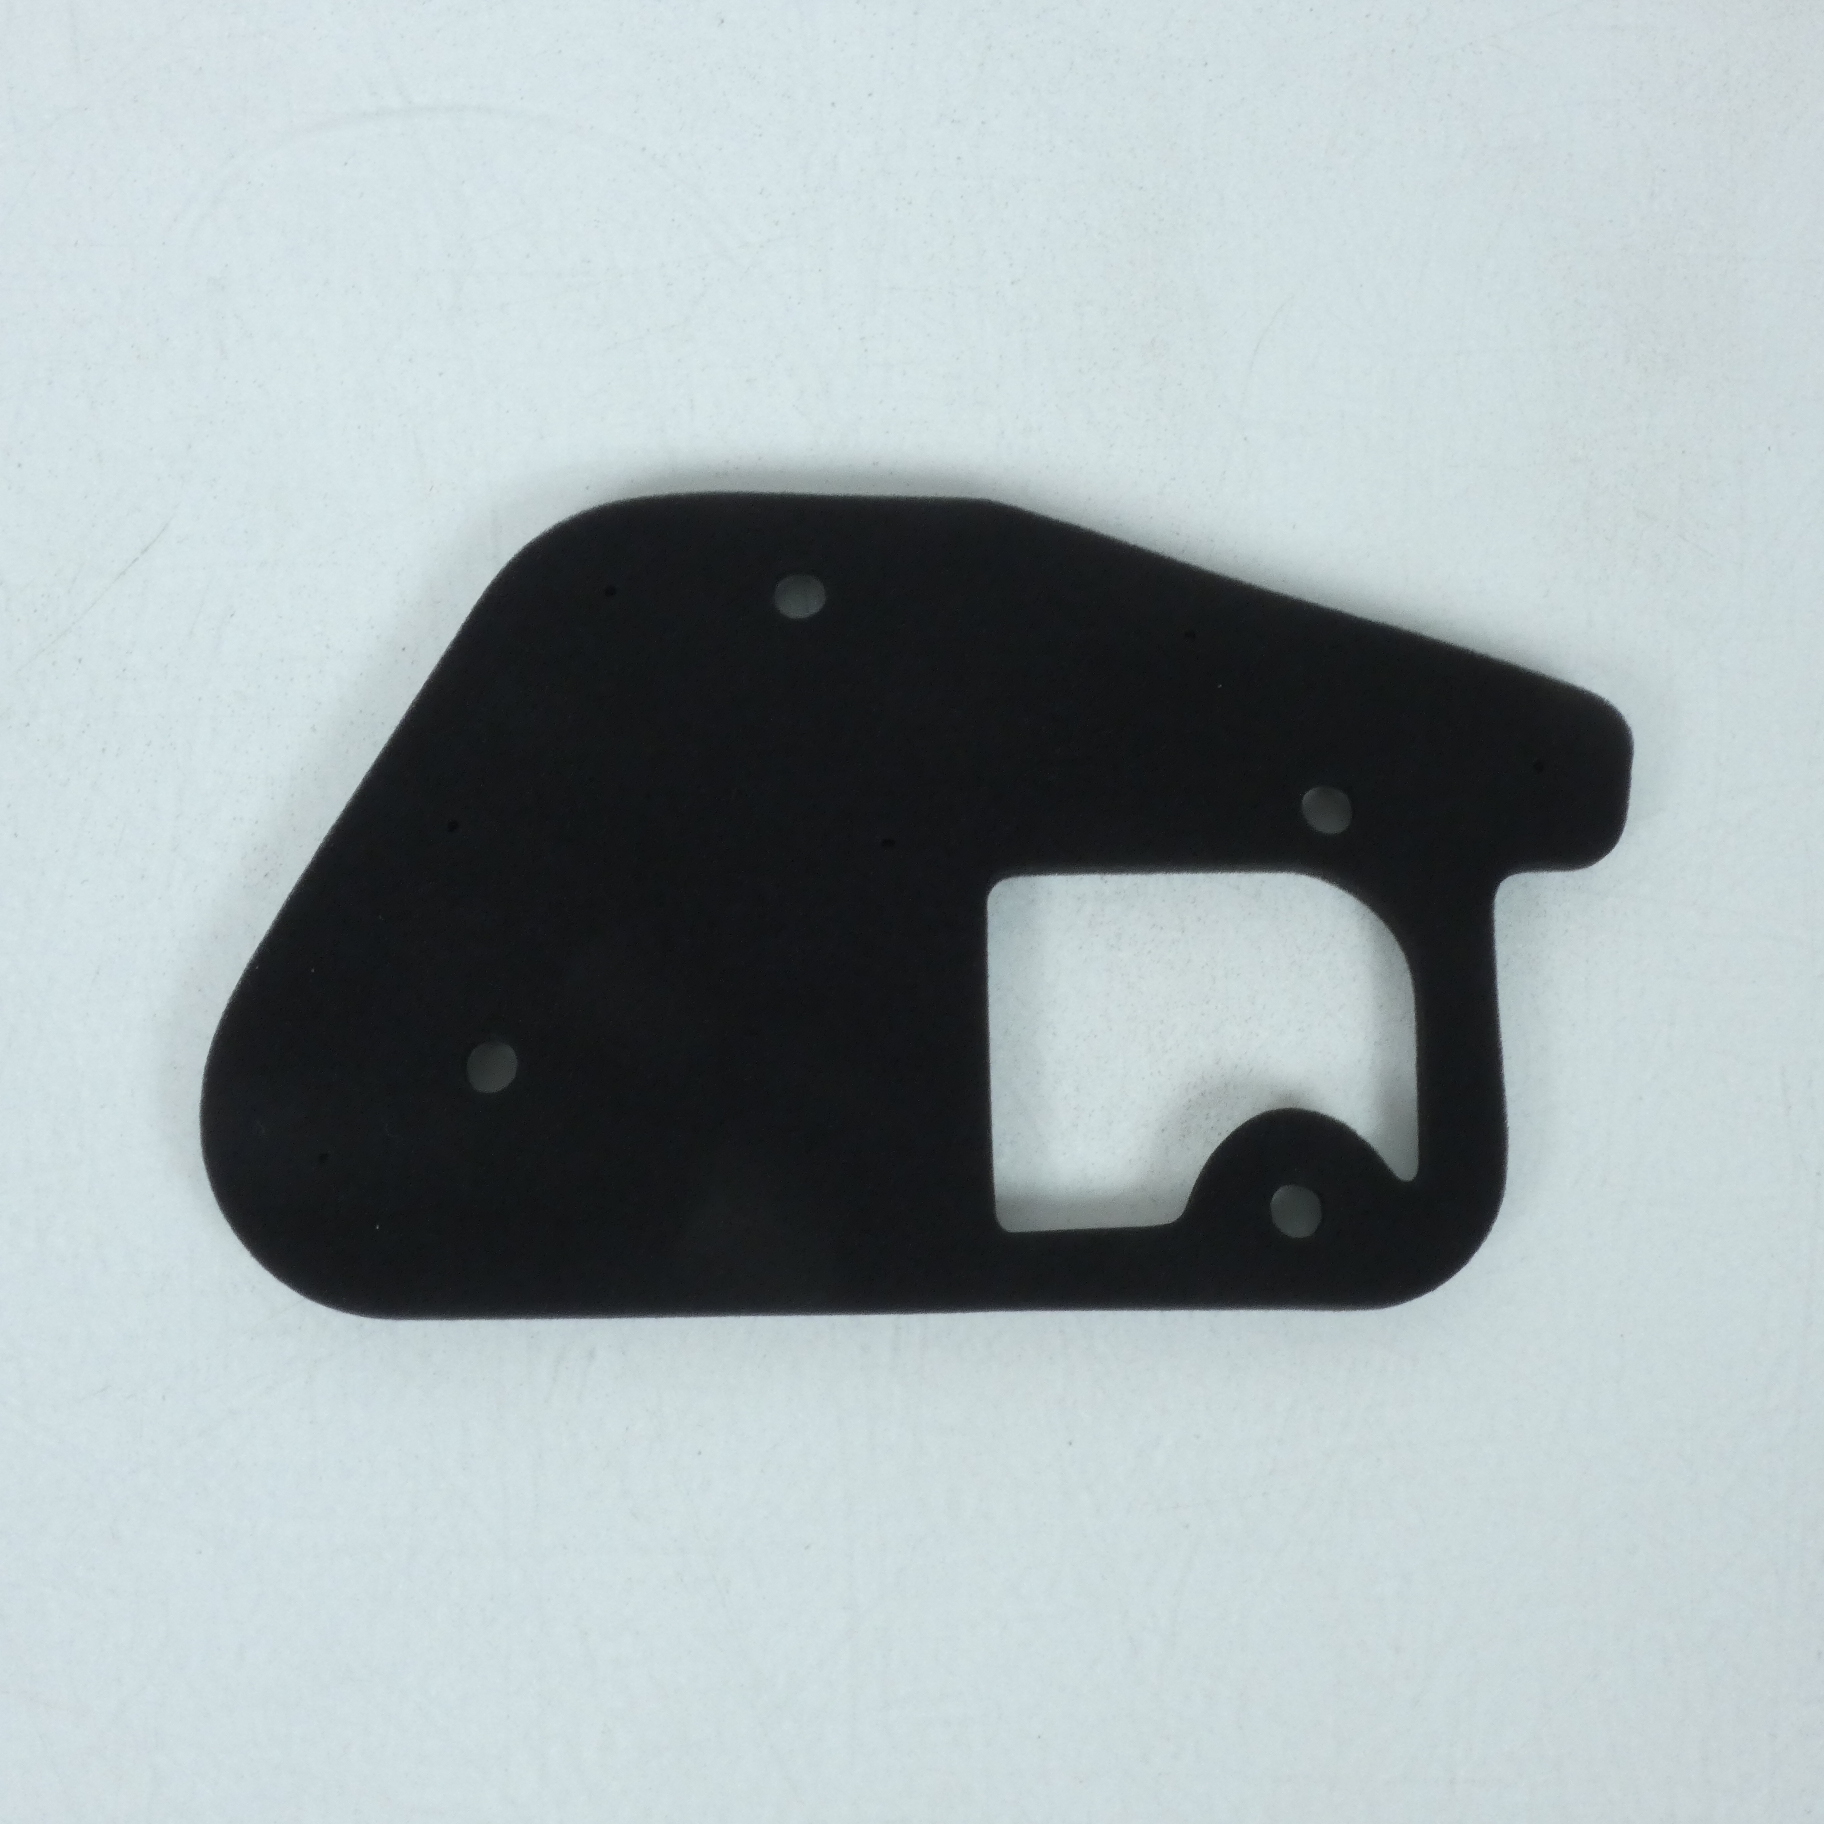 Filtre à air Sifam pour scooter Yamaha 50 BWS 1996-2016 Neuf